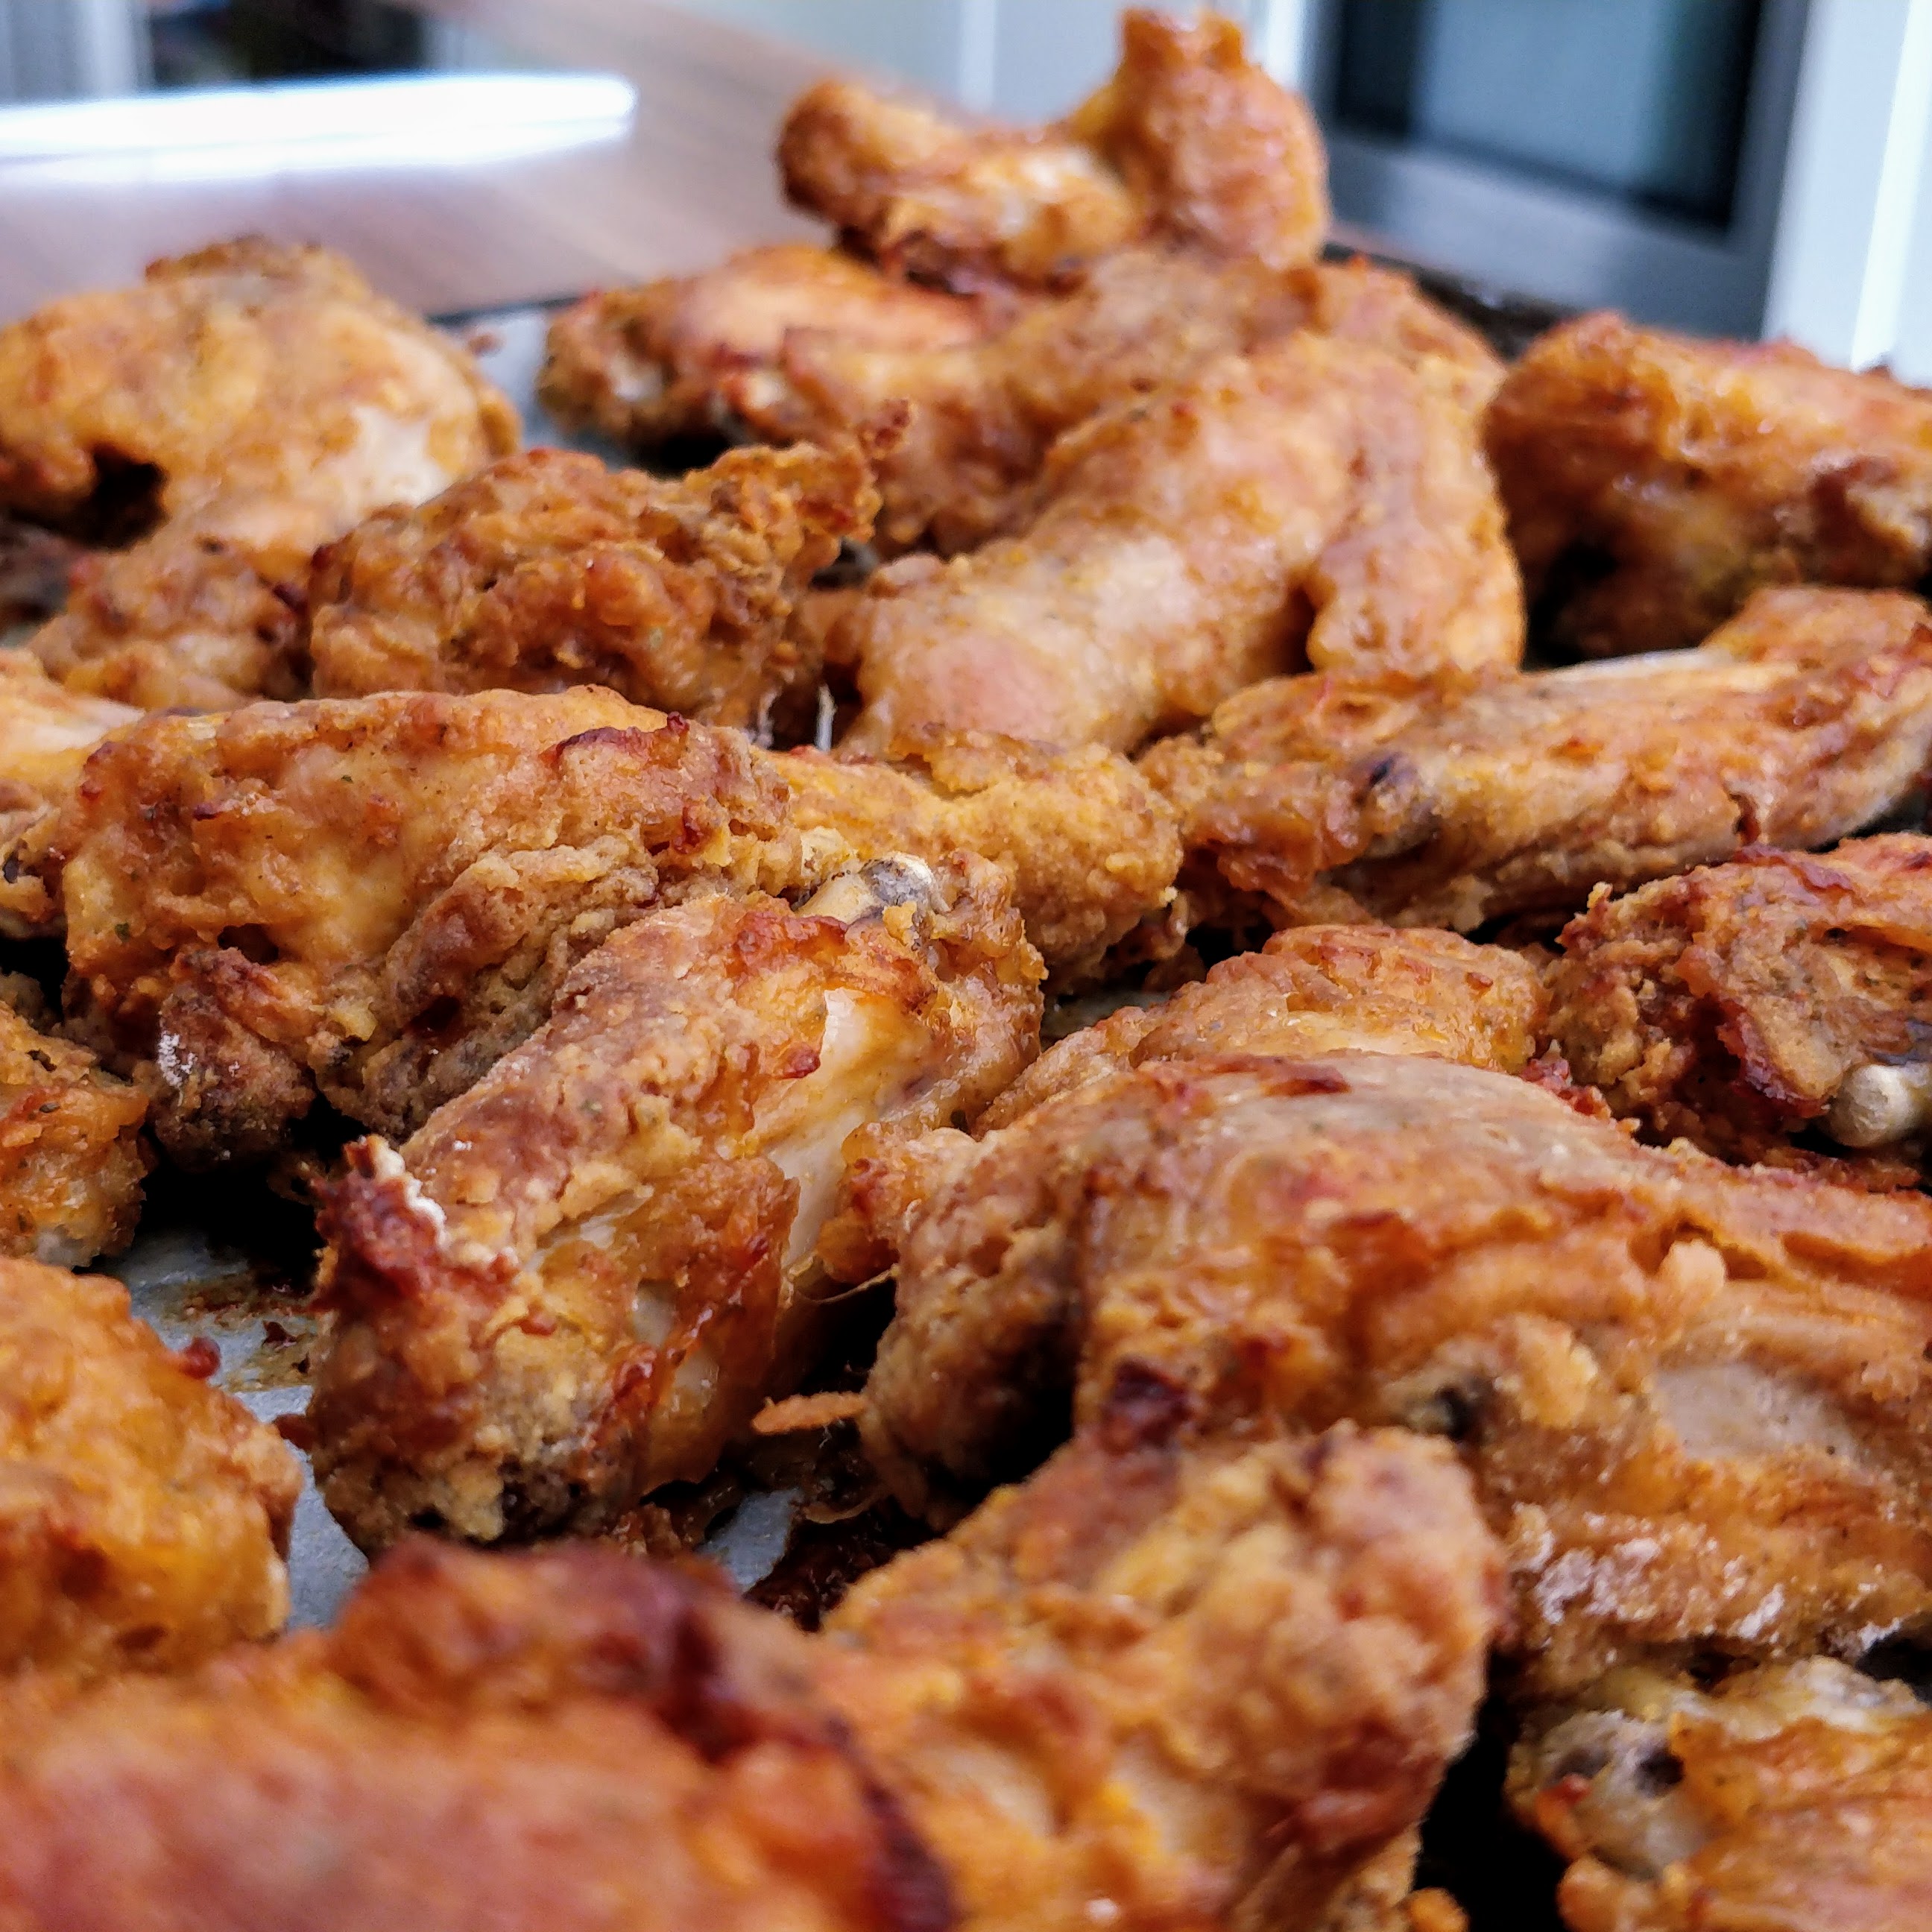 Cooked chicken wings